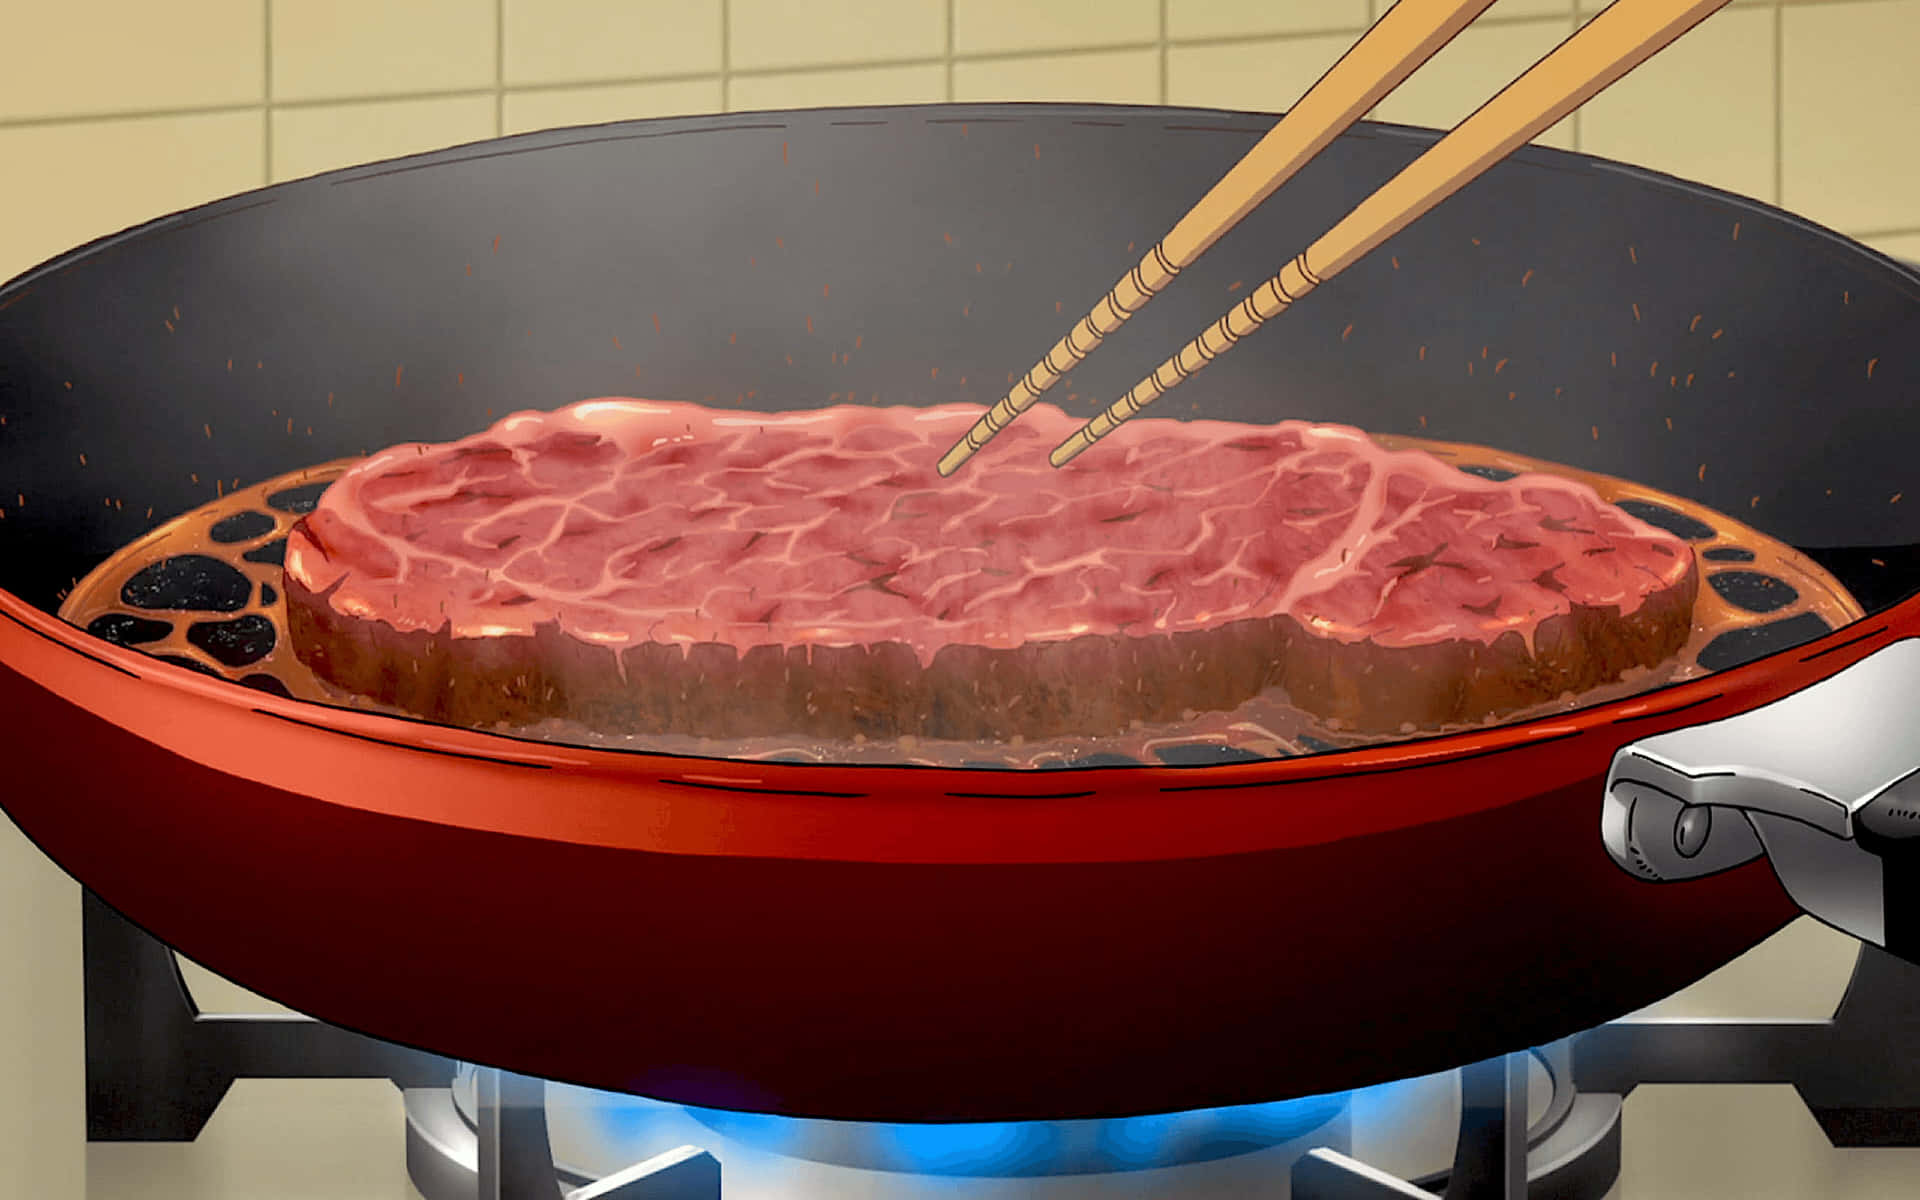 A Steak Is Being Cooked In A Pan With Chopsticks